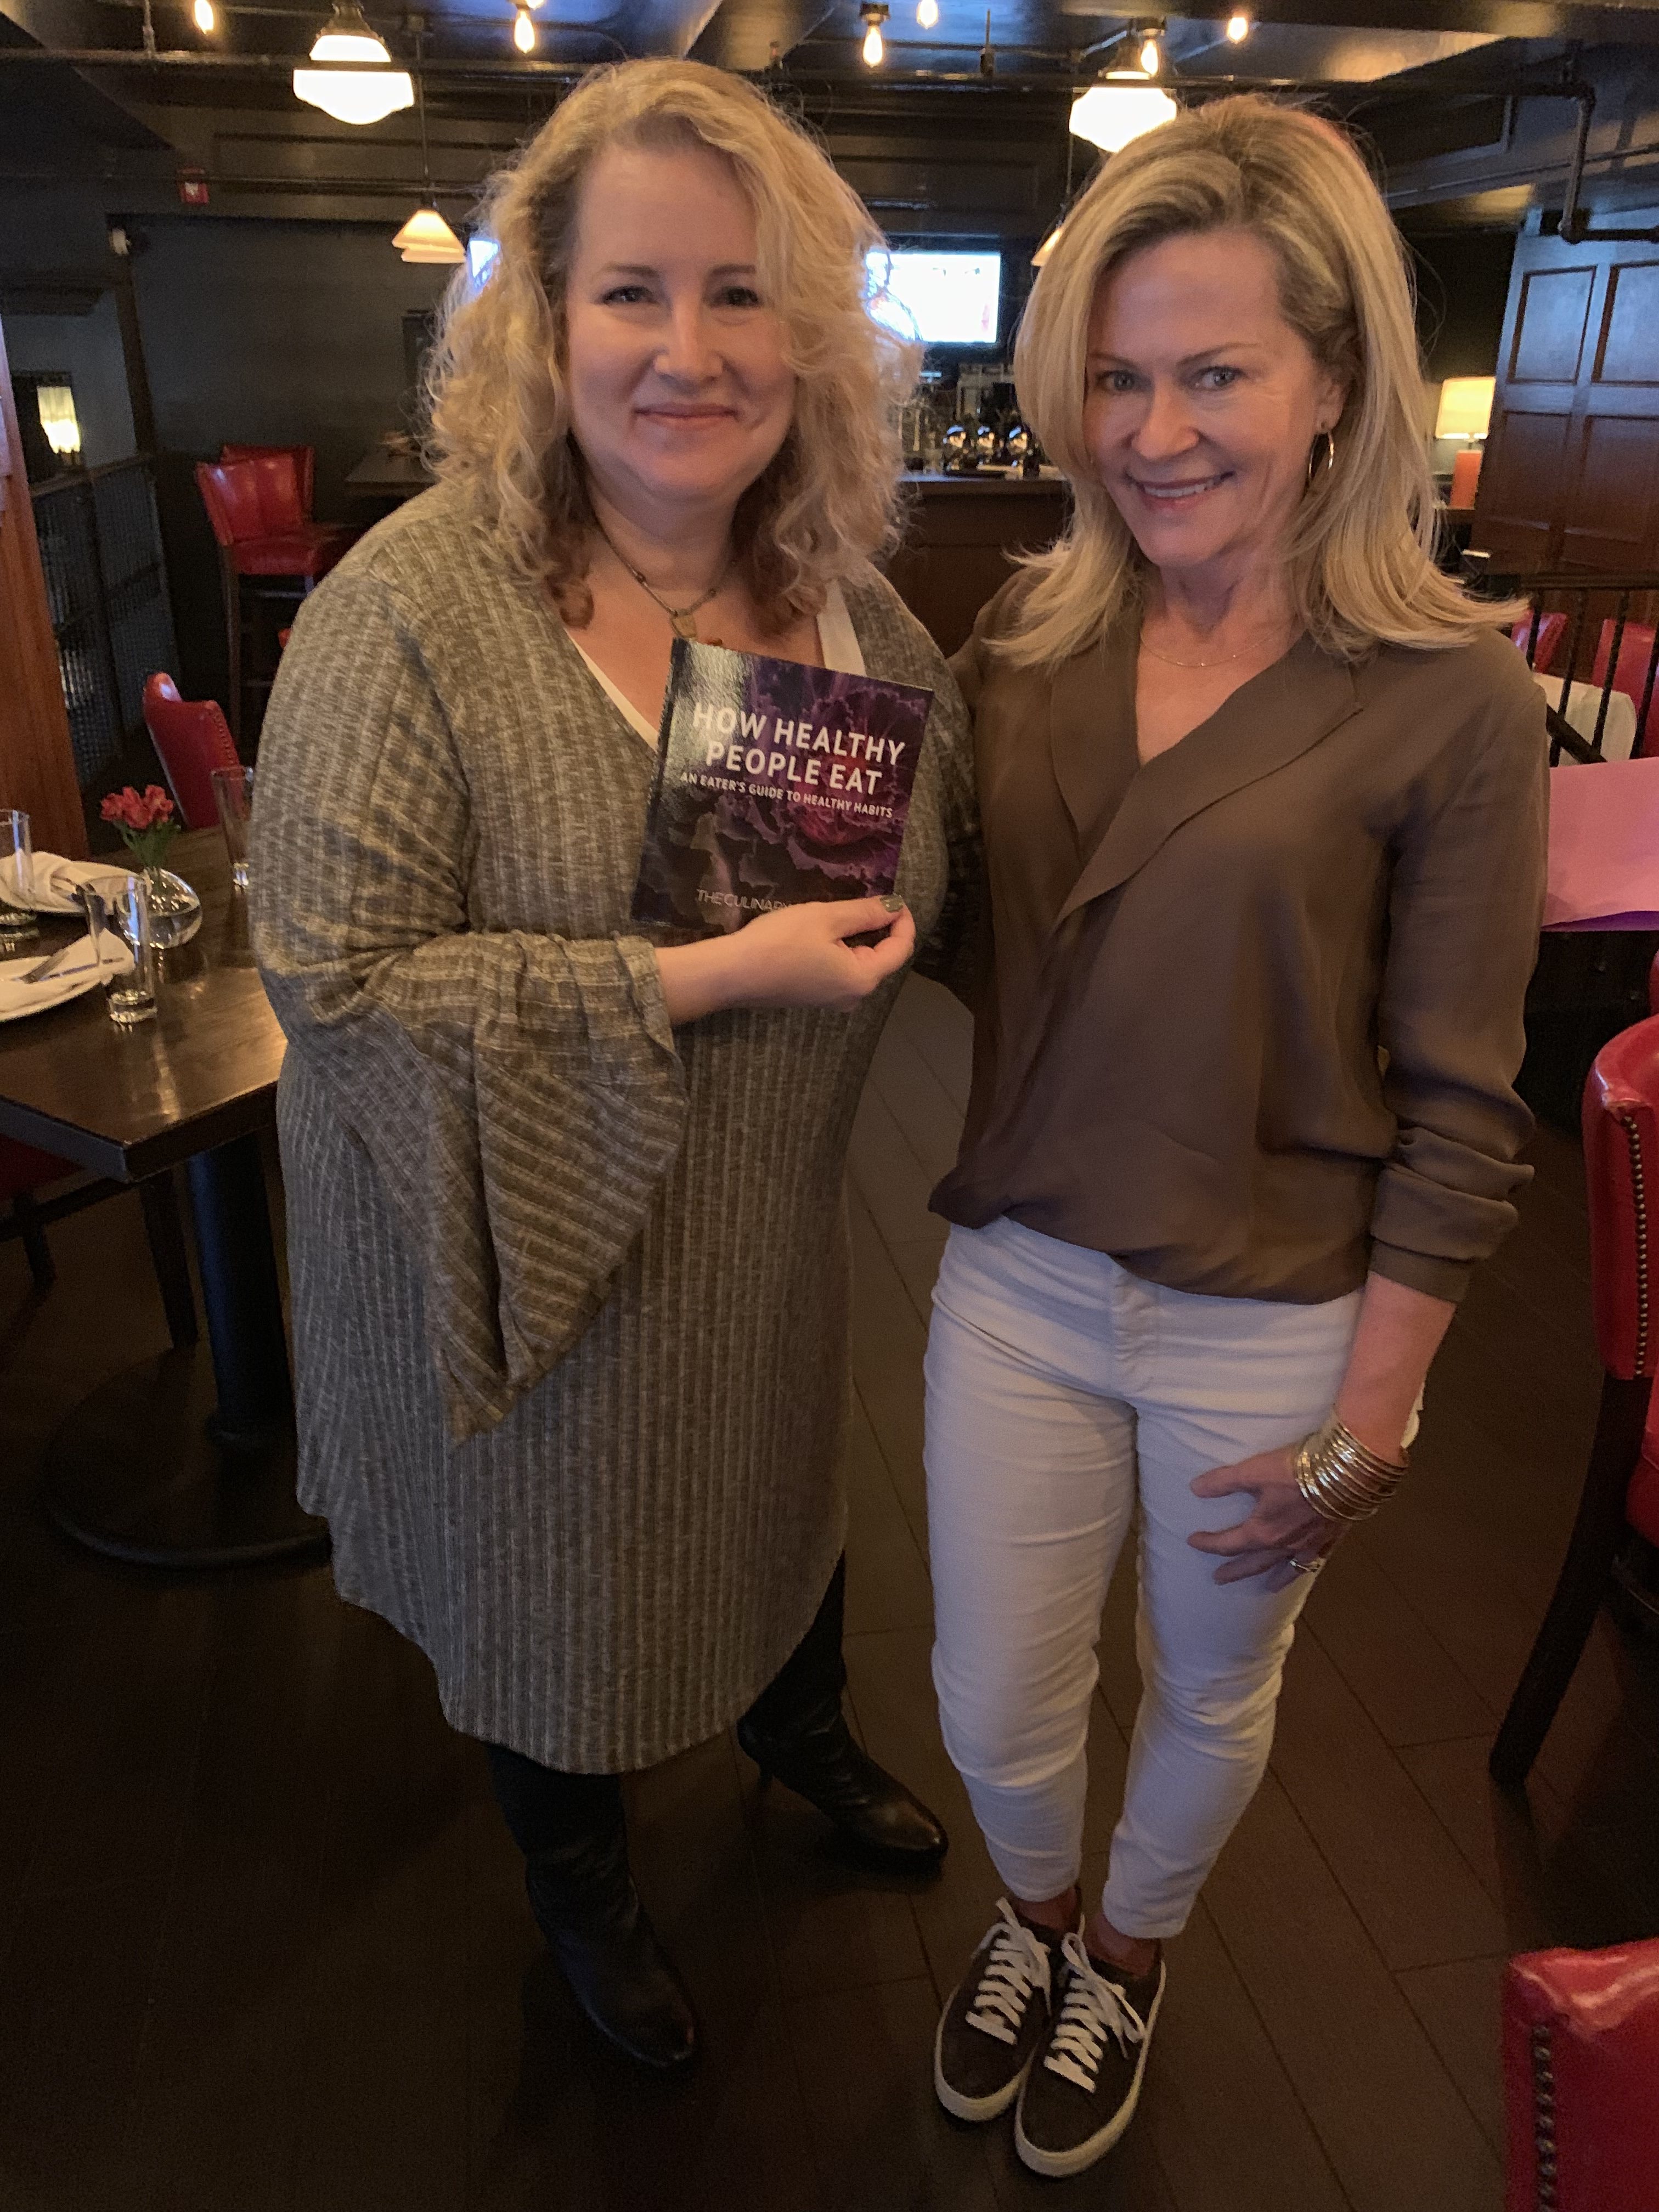 Lisa Selwitz won a copy of Kristen Coffield's book, How Healthy People Eat An Eater's Guide To Healthy Habits